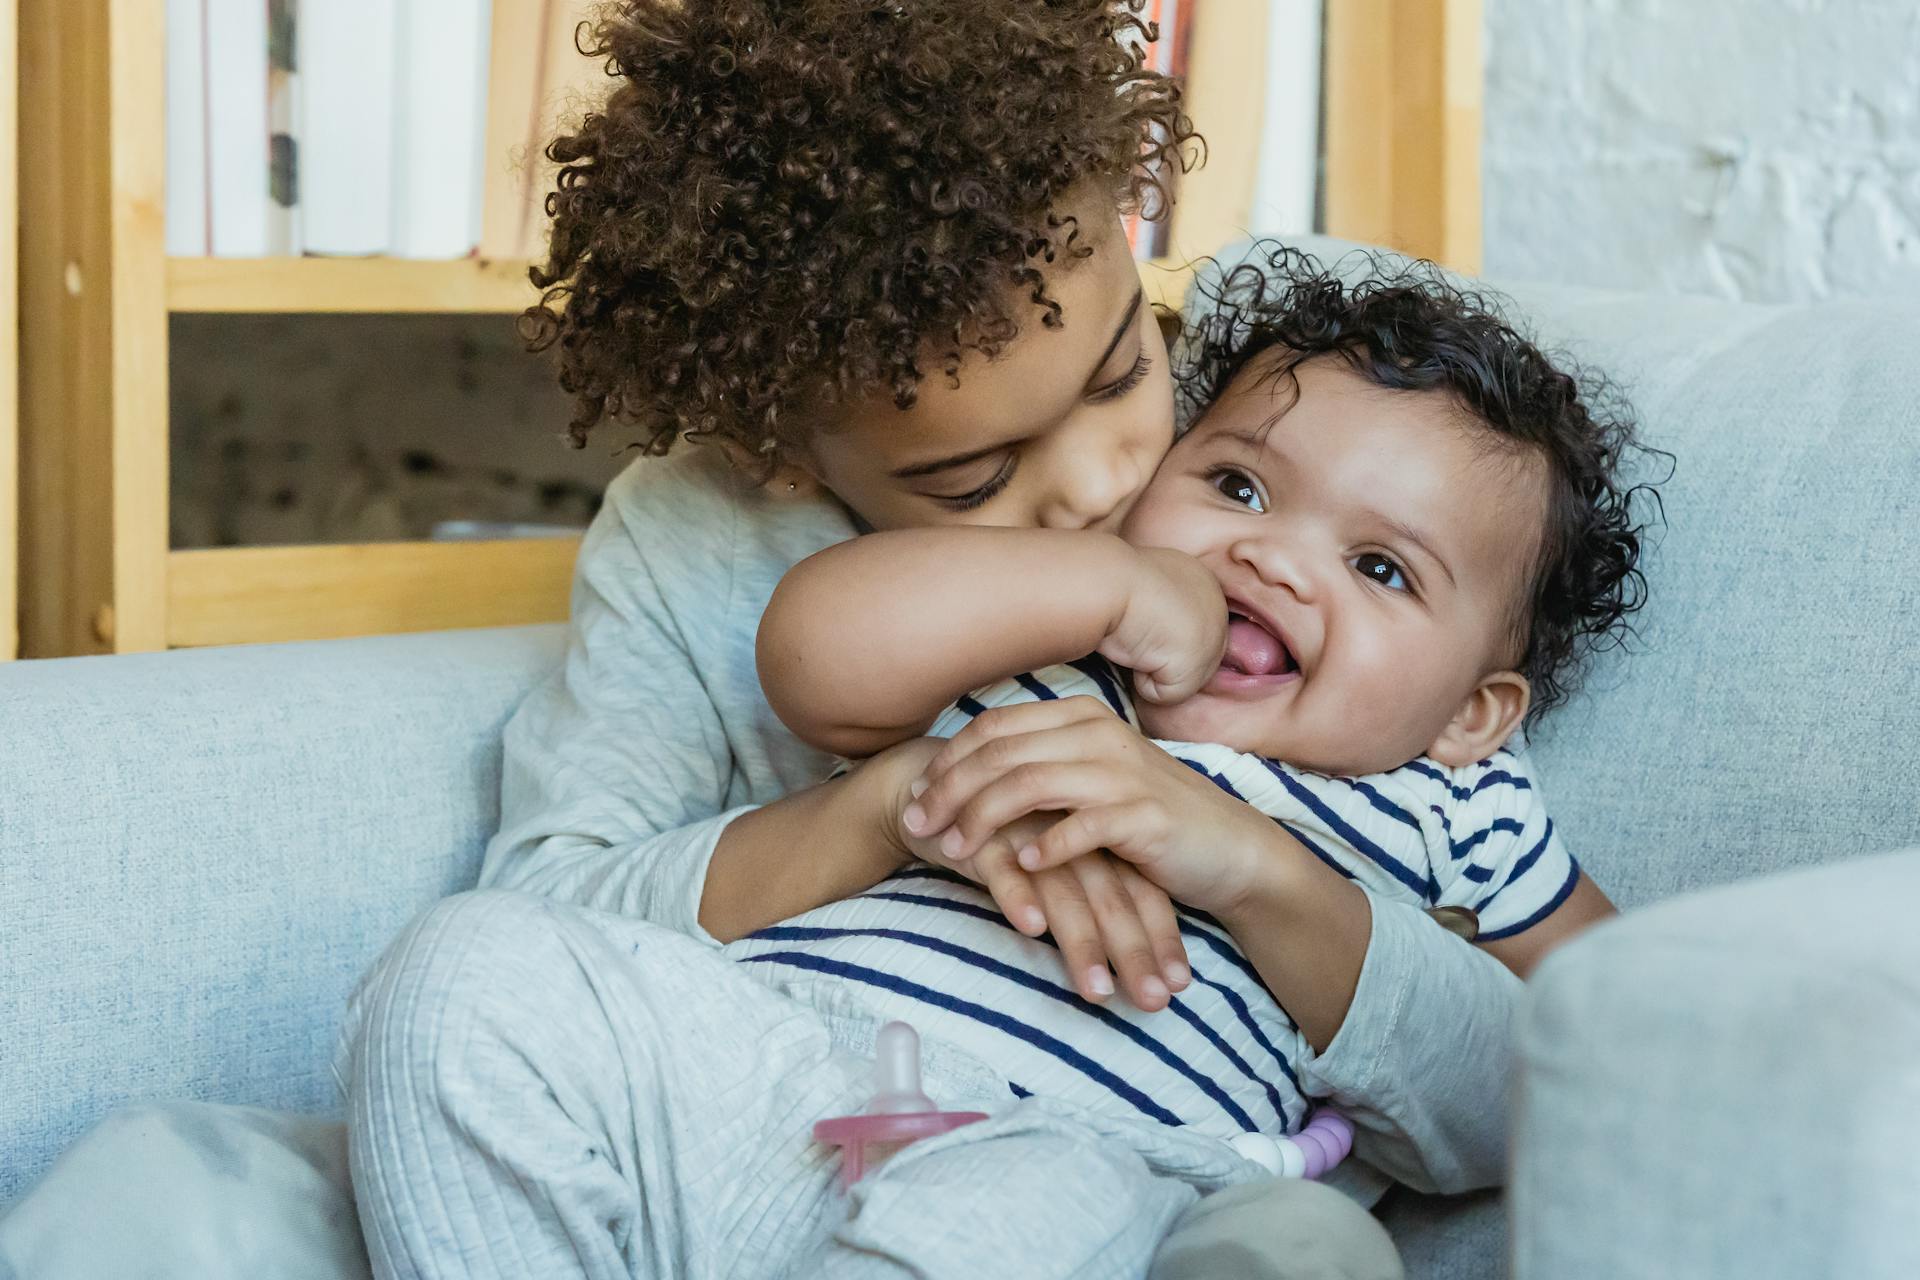 African American boy with curly hair embracing and kissing adorable smiling little baby while sitting in comfortable armchair